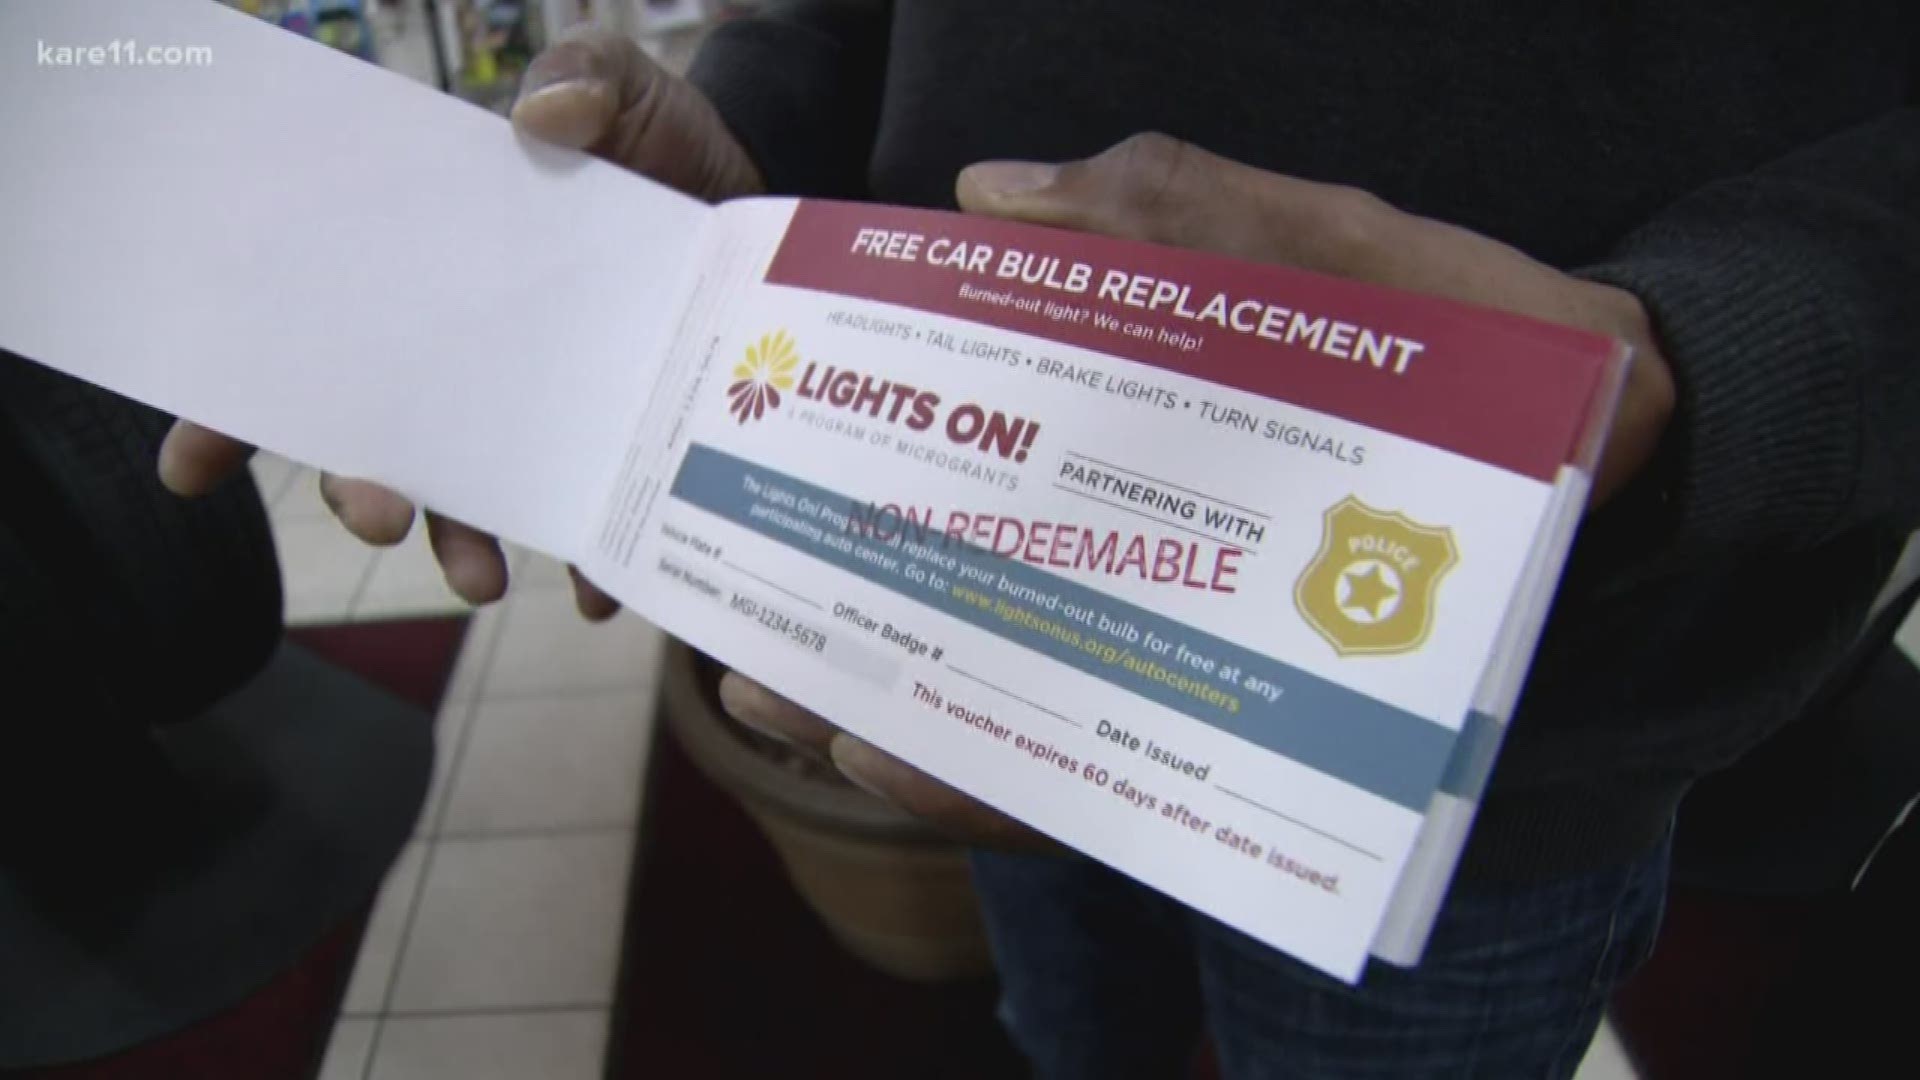 Instead of fix-it tickets, Hennepin County deputies will now hand out vouchers to help pay for repairs.